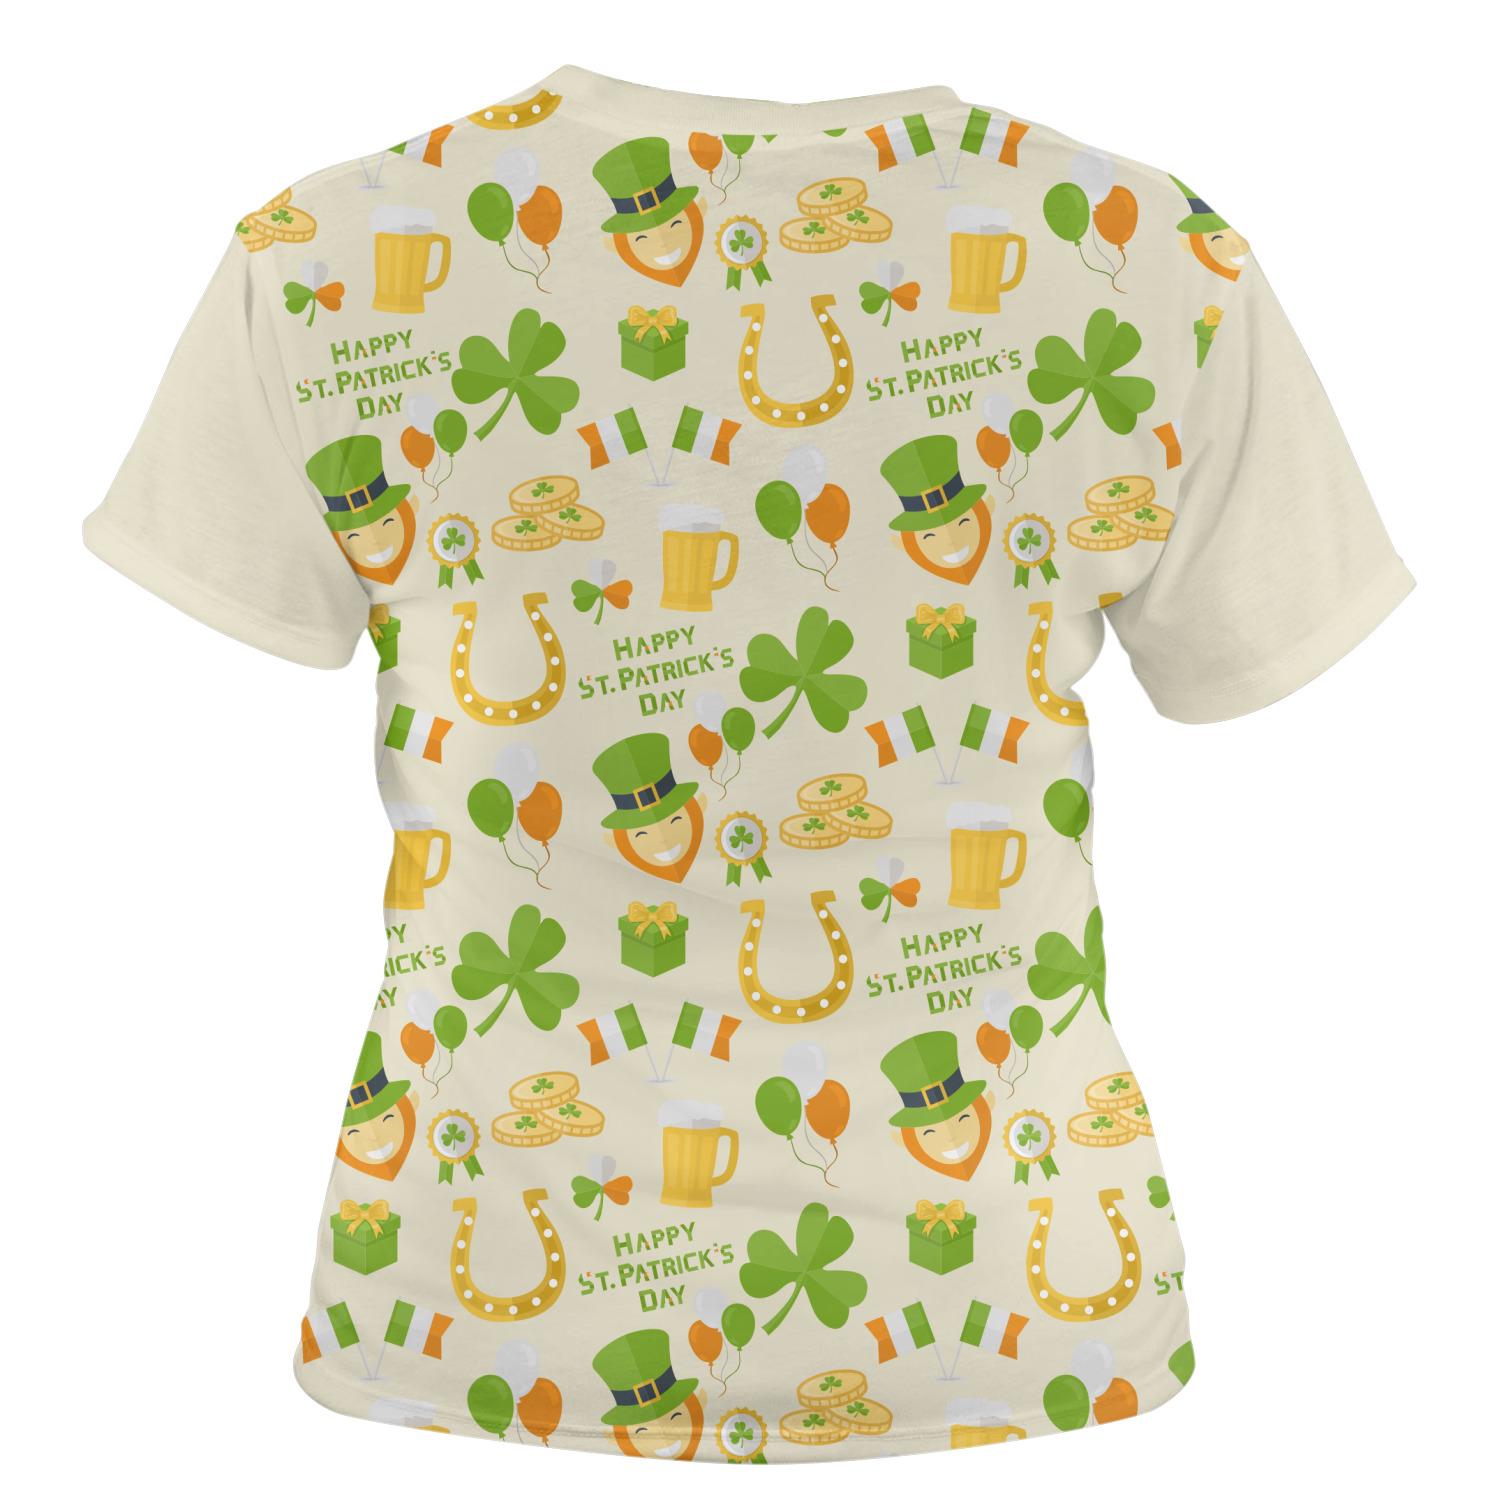 St. Patrick's Day Women's Crew T-Shirt (Personalized) - YouCustomizeIt